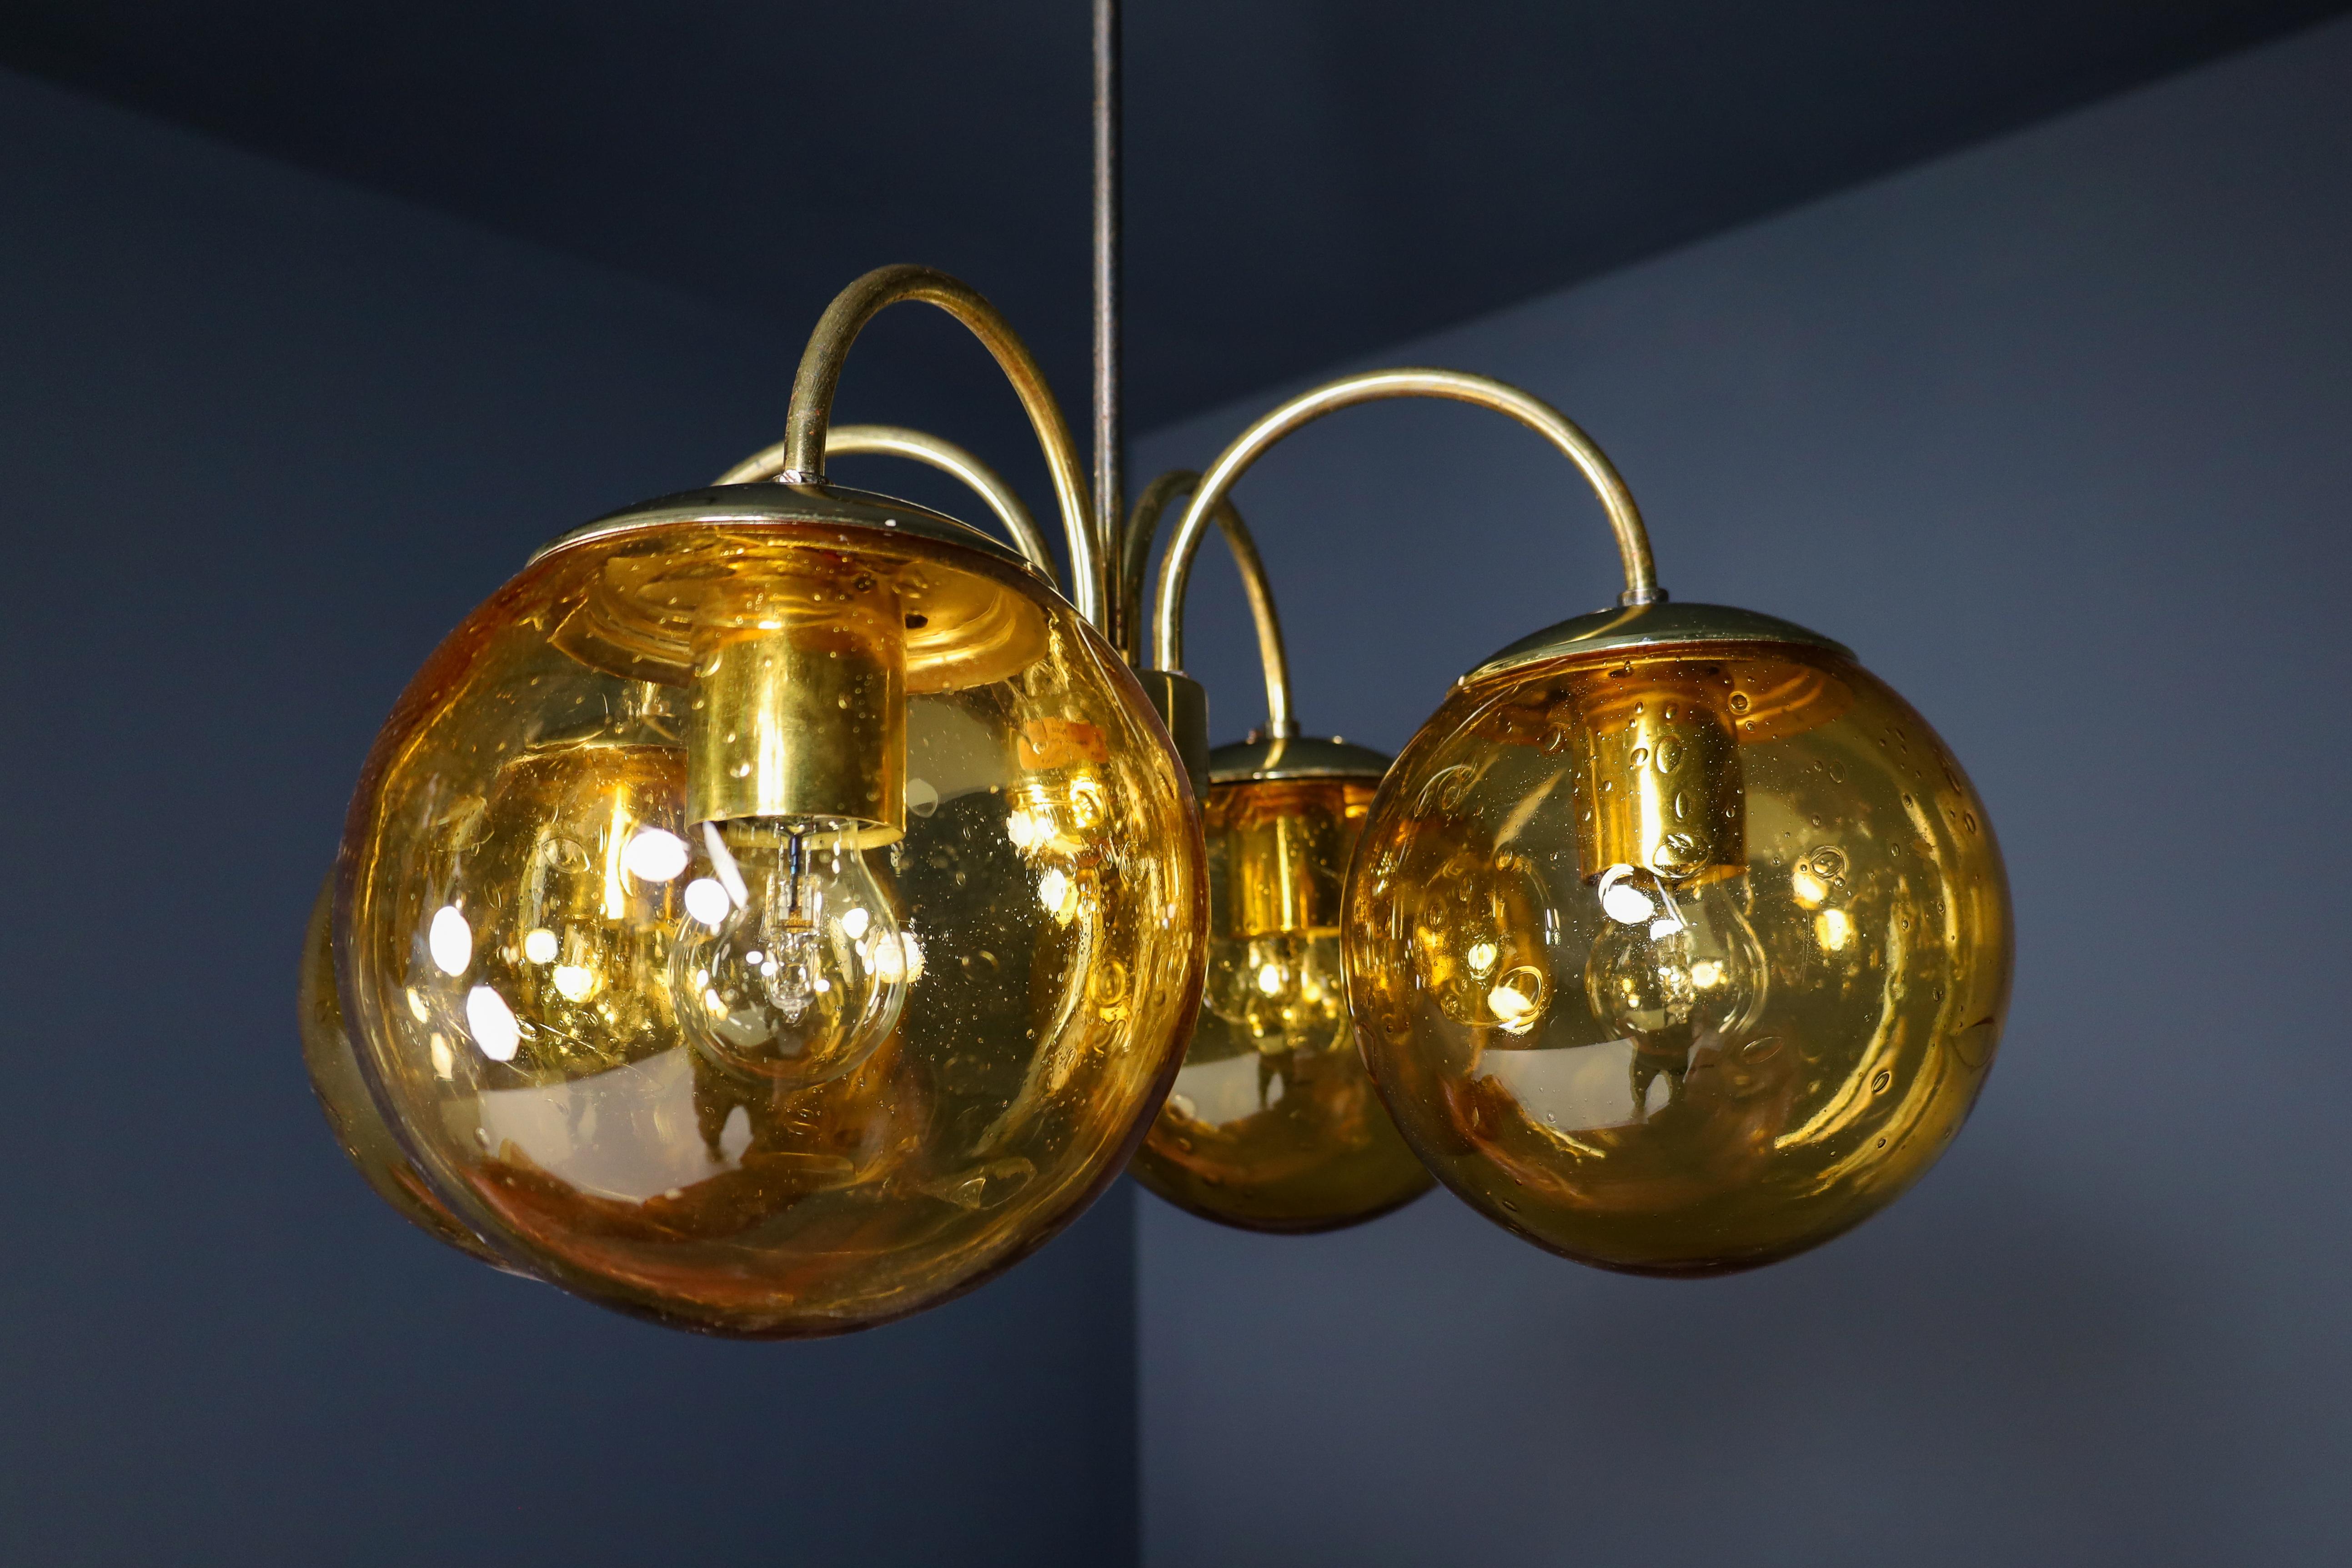 Midcentury Chandeliers in Brass and Amber-Colored Glass Czech Republic, 1960s For Sale 5